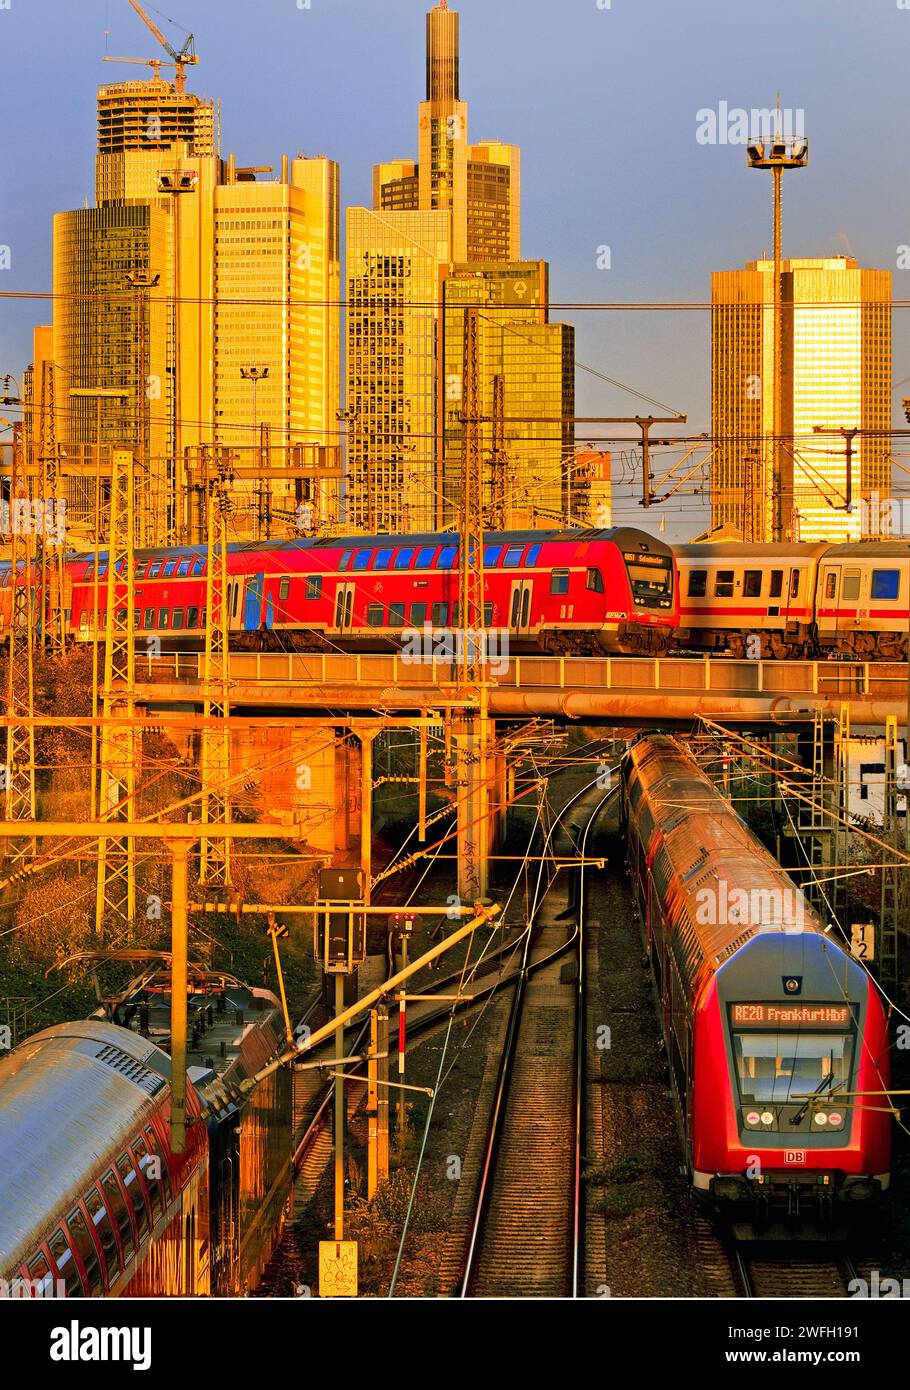 several trains at central station and high-rise buildings, Germany, Hesse, Frankfurt am Main Stock Photo